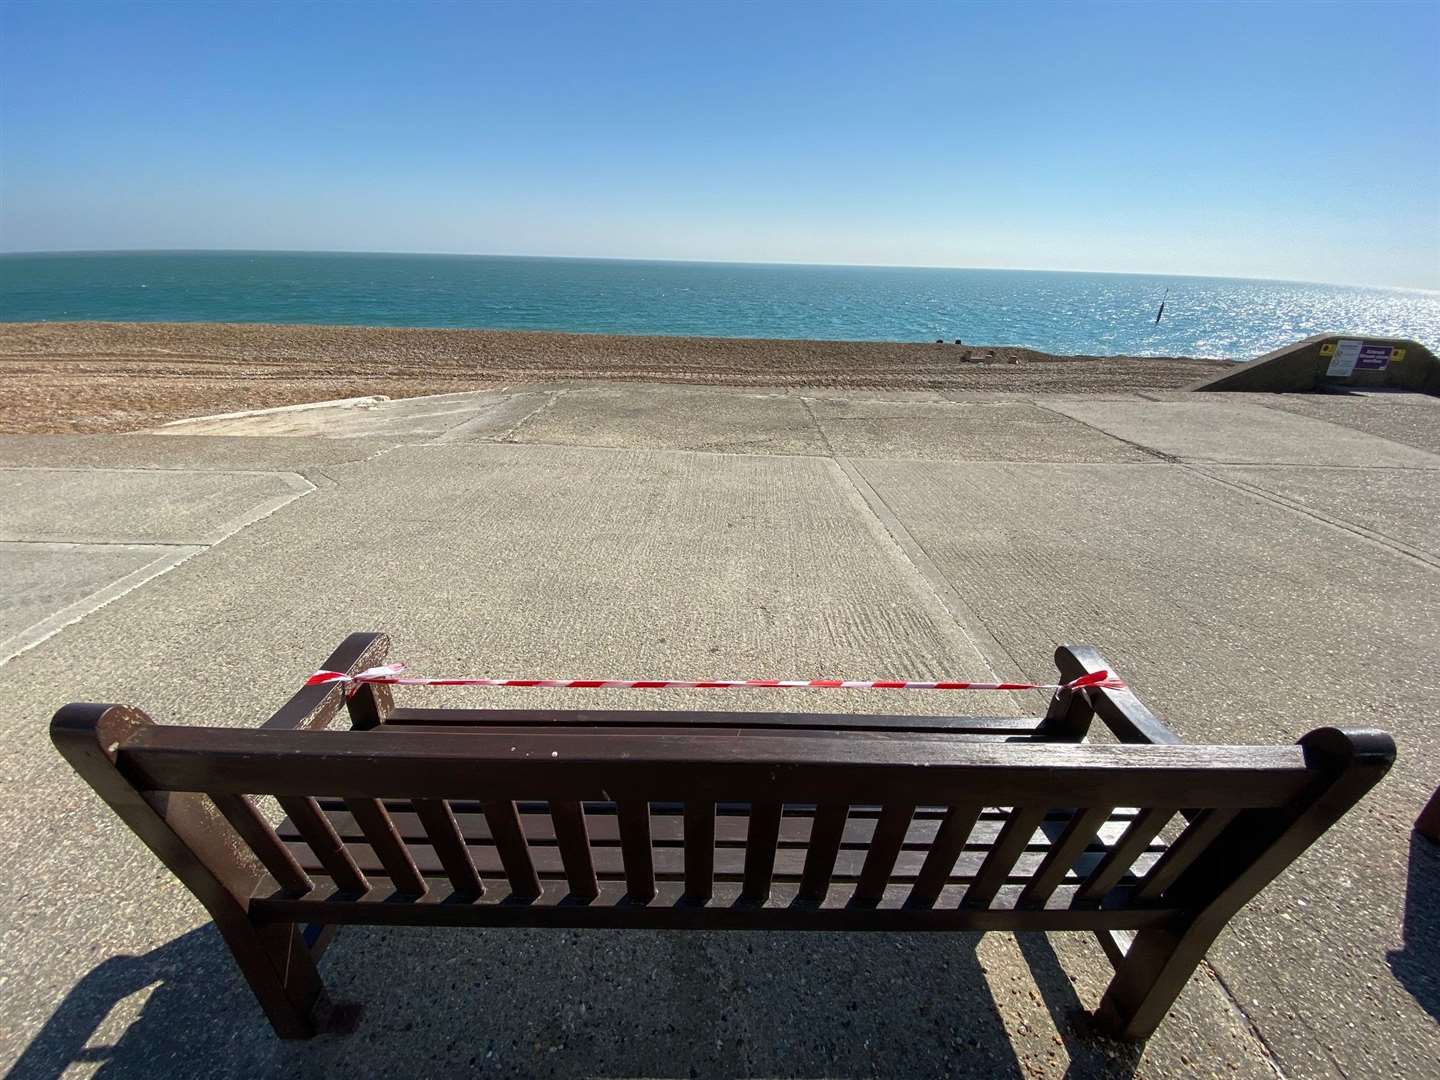 Lockdown loiterers are discouraged by this taped-off bench on Sandgate seafront.